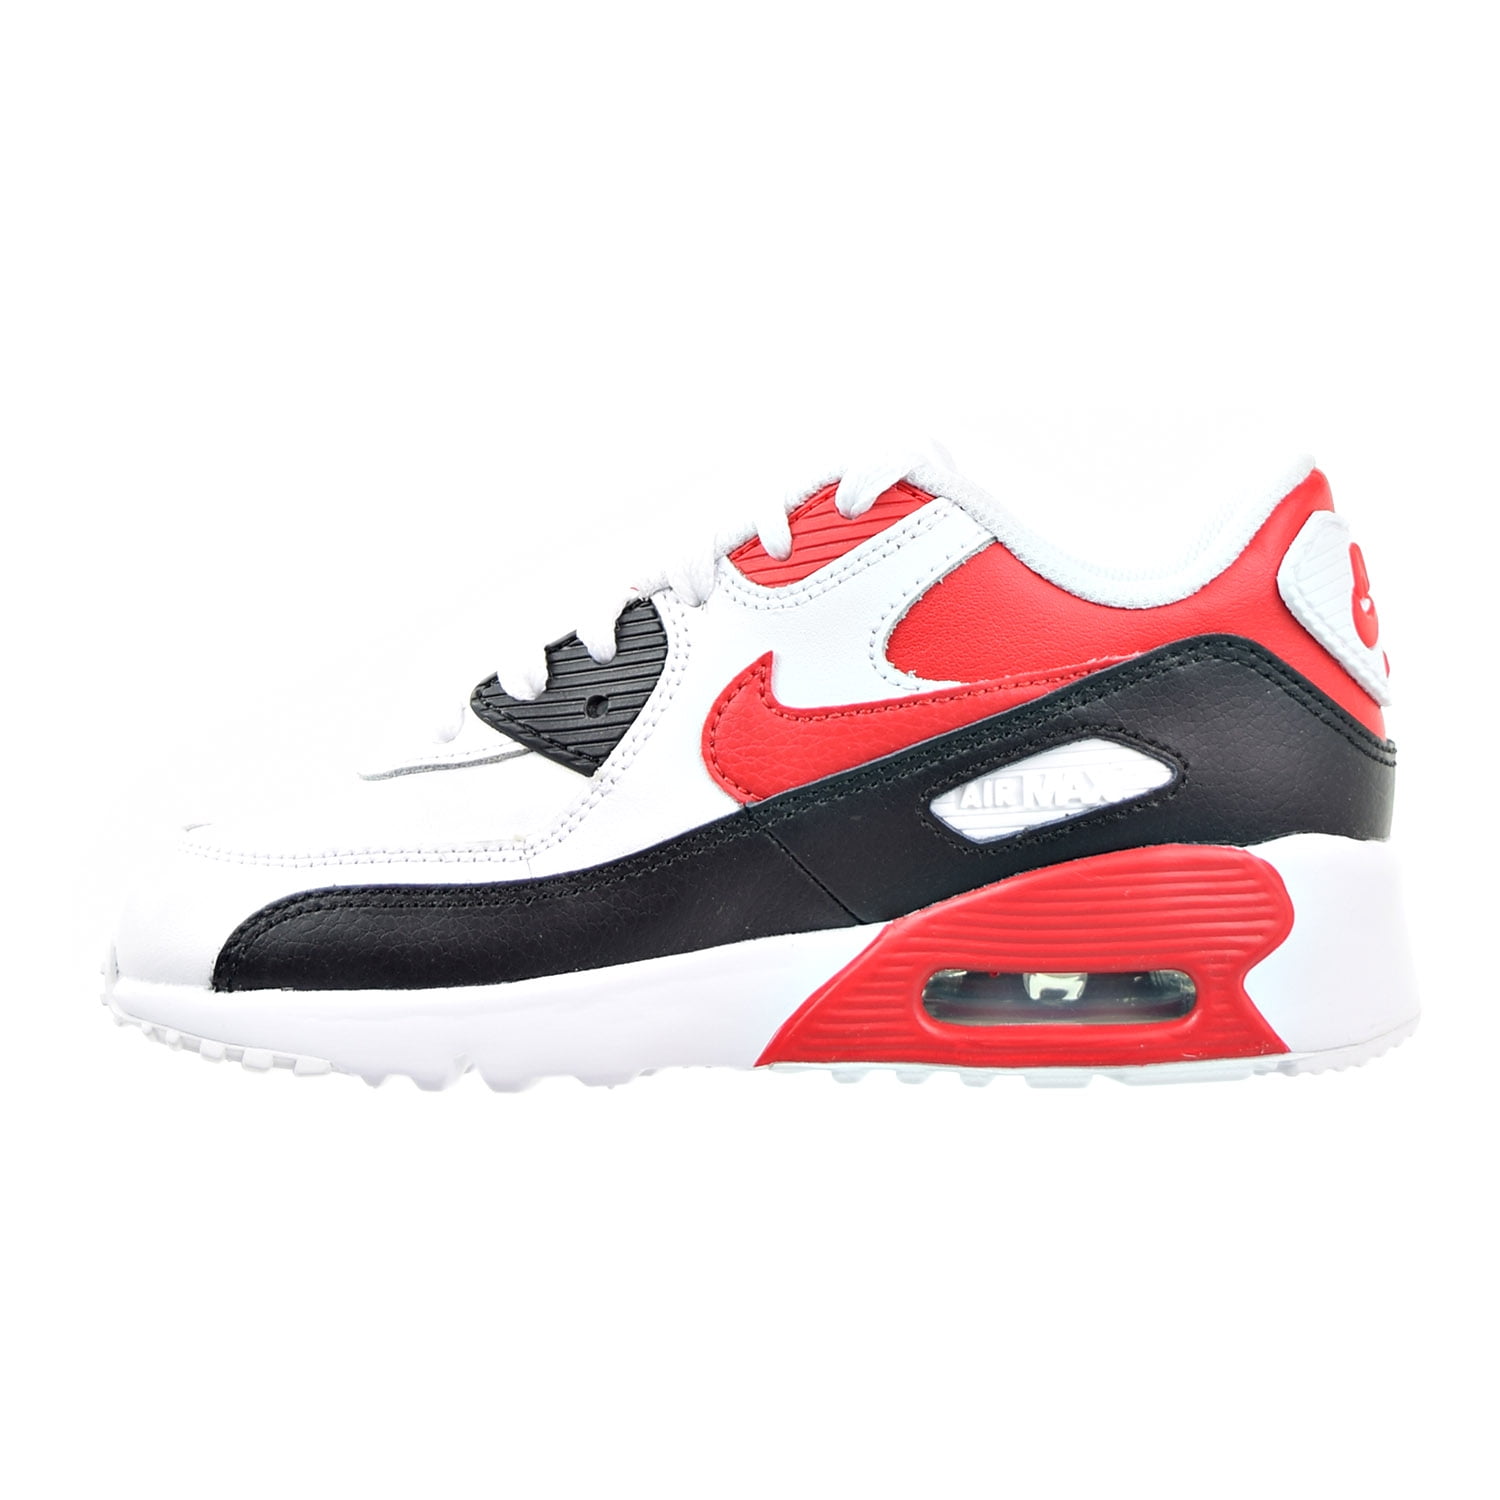 Nike Air Max 90 Essential University Red 2019 for Sale | Authenticity  Guaranteed | eBay